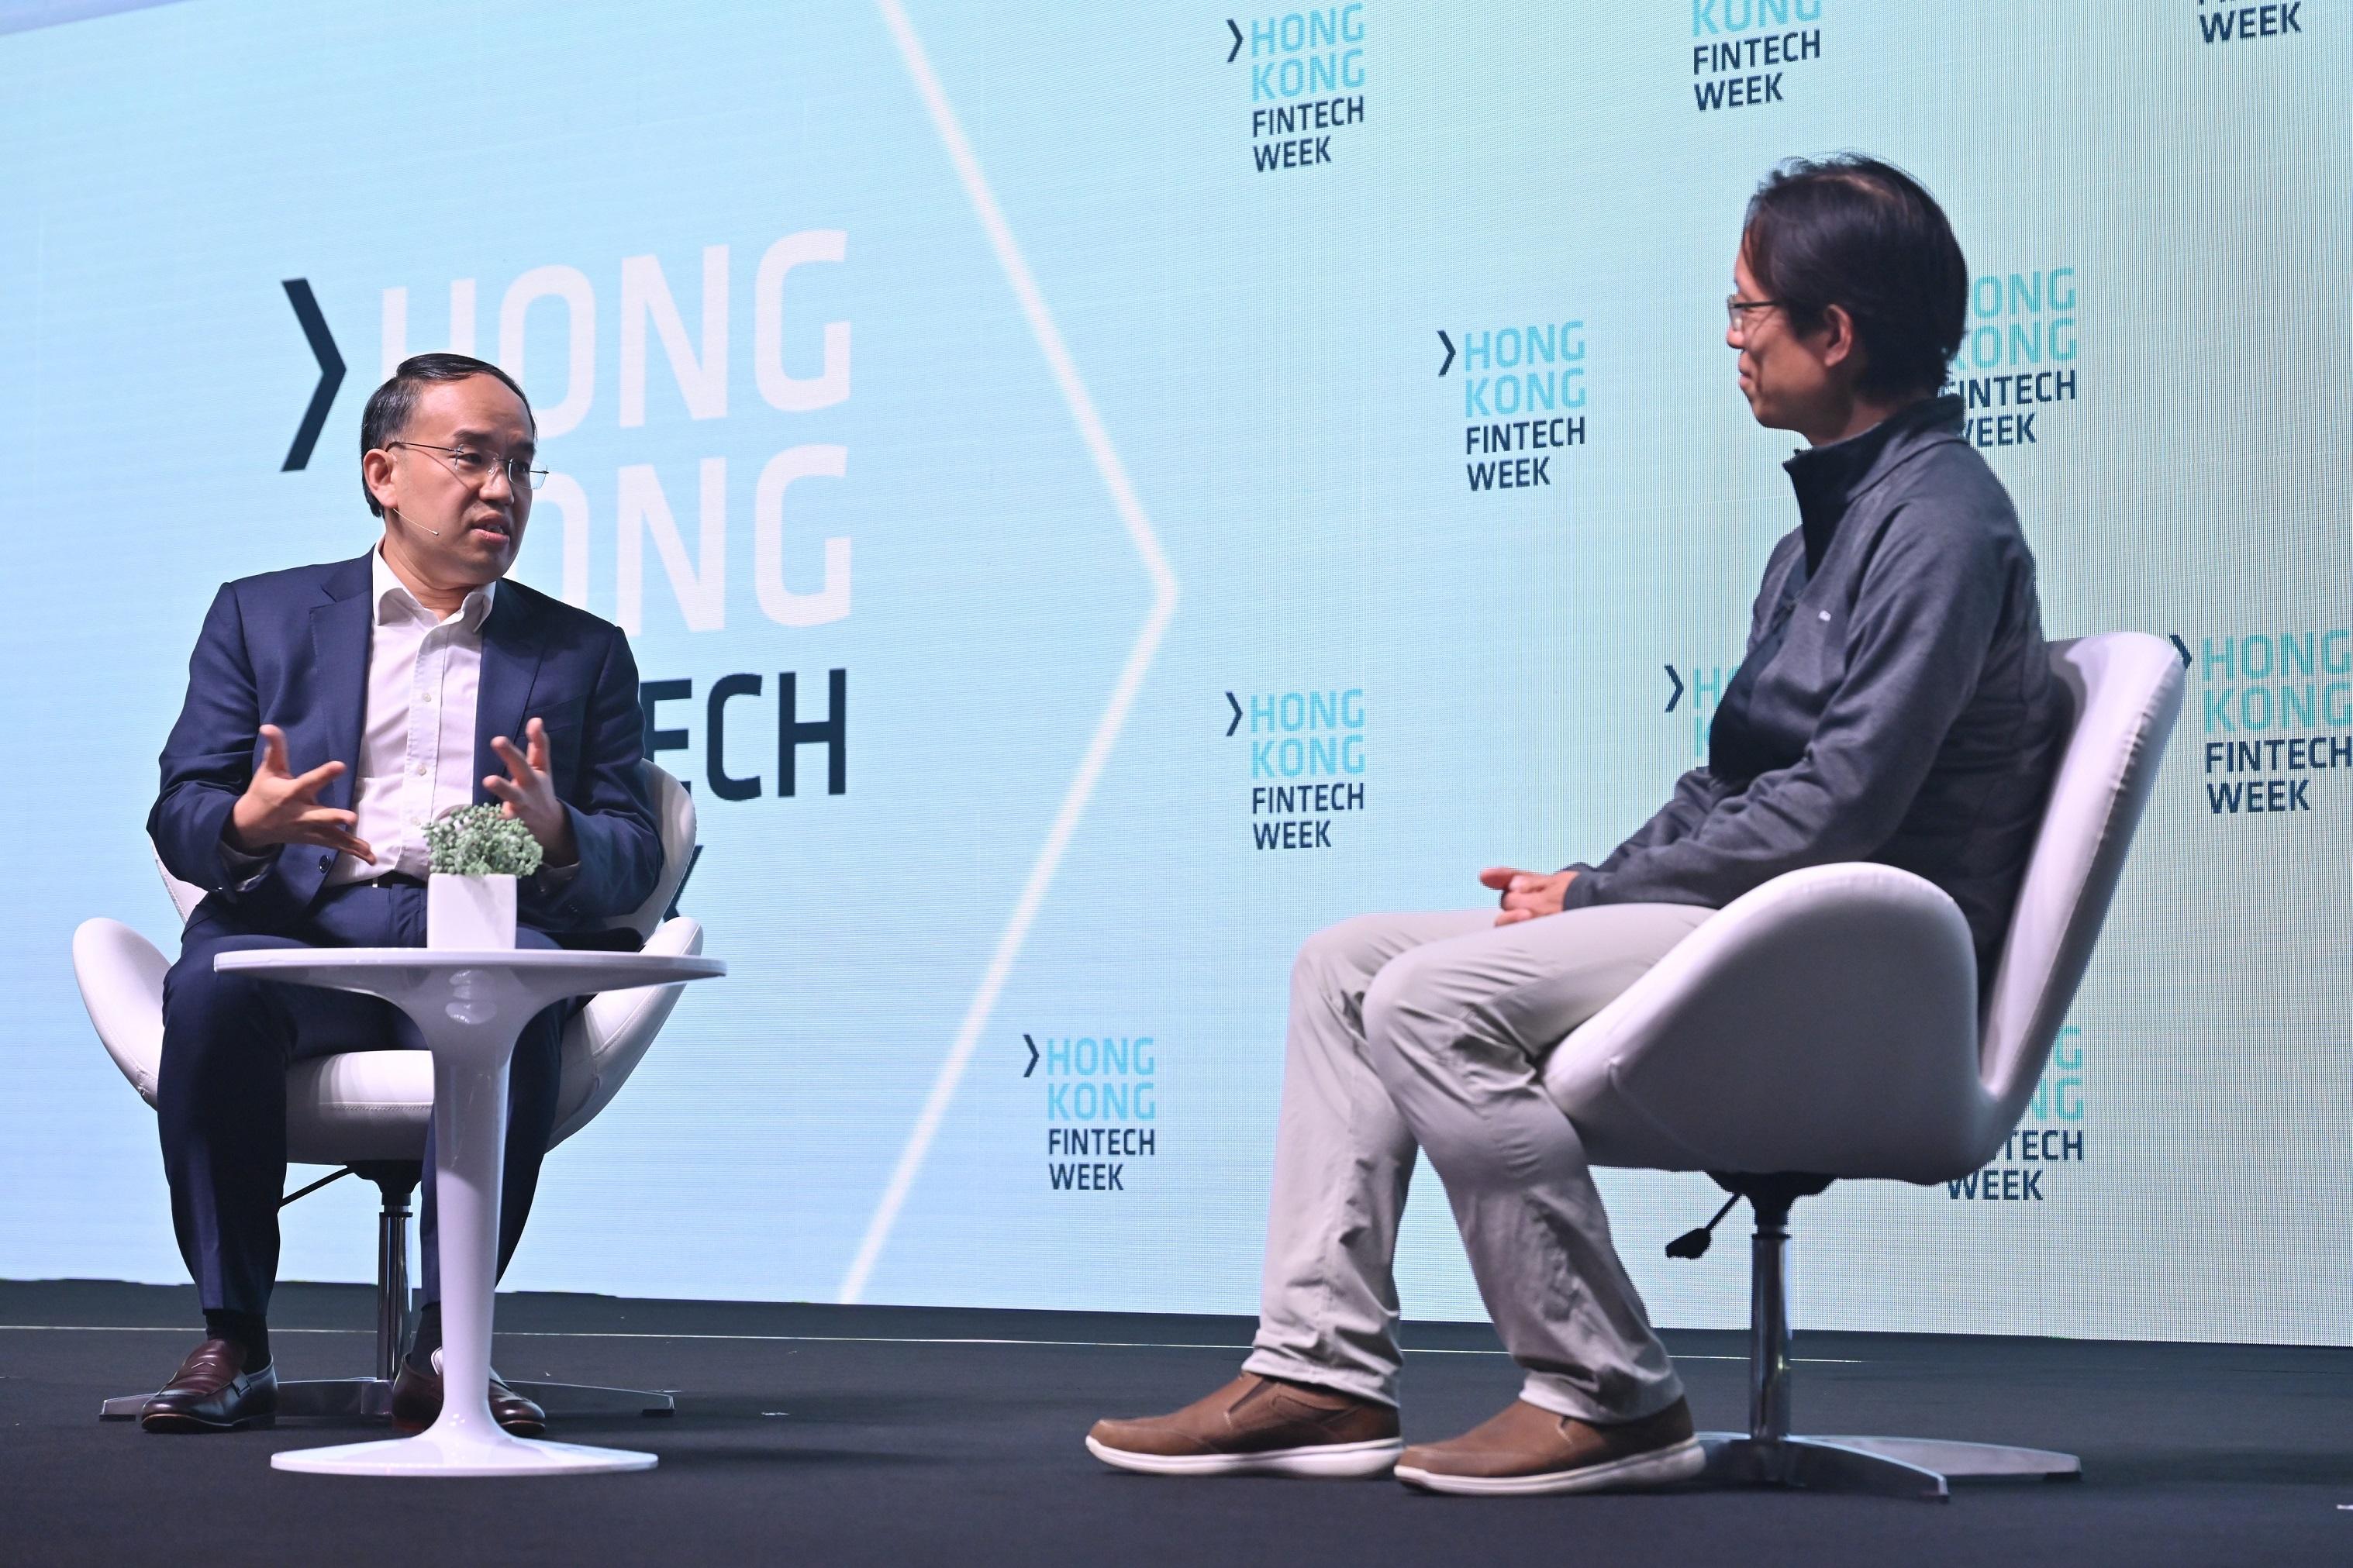 The five-day Hong Kong FinTech Week 2022 attracted over 30 000 visitors and more than five million online views from over 95 economies. Photo shows the Secretary for Financial Services and the Treasury, Mr Christopher Hui (left), and the Co-Founder and Executive Chairman of Animoca Brands, Mr Yat Siu (right), during a Fireside Chat on October 31, discussing how Hong Kong’s rapid technology adoption serves as a unique advantage.